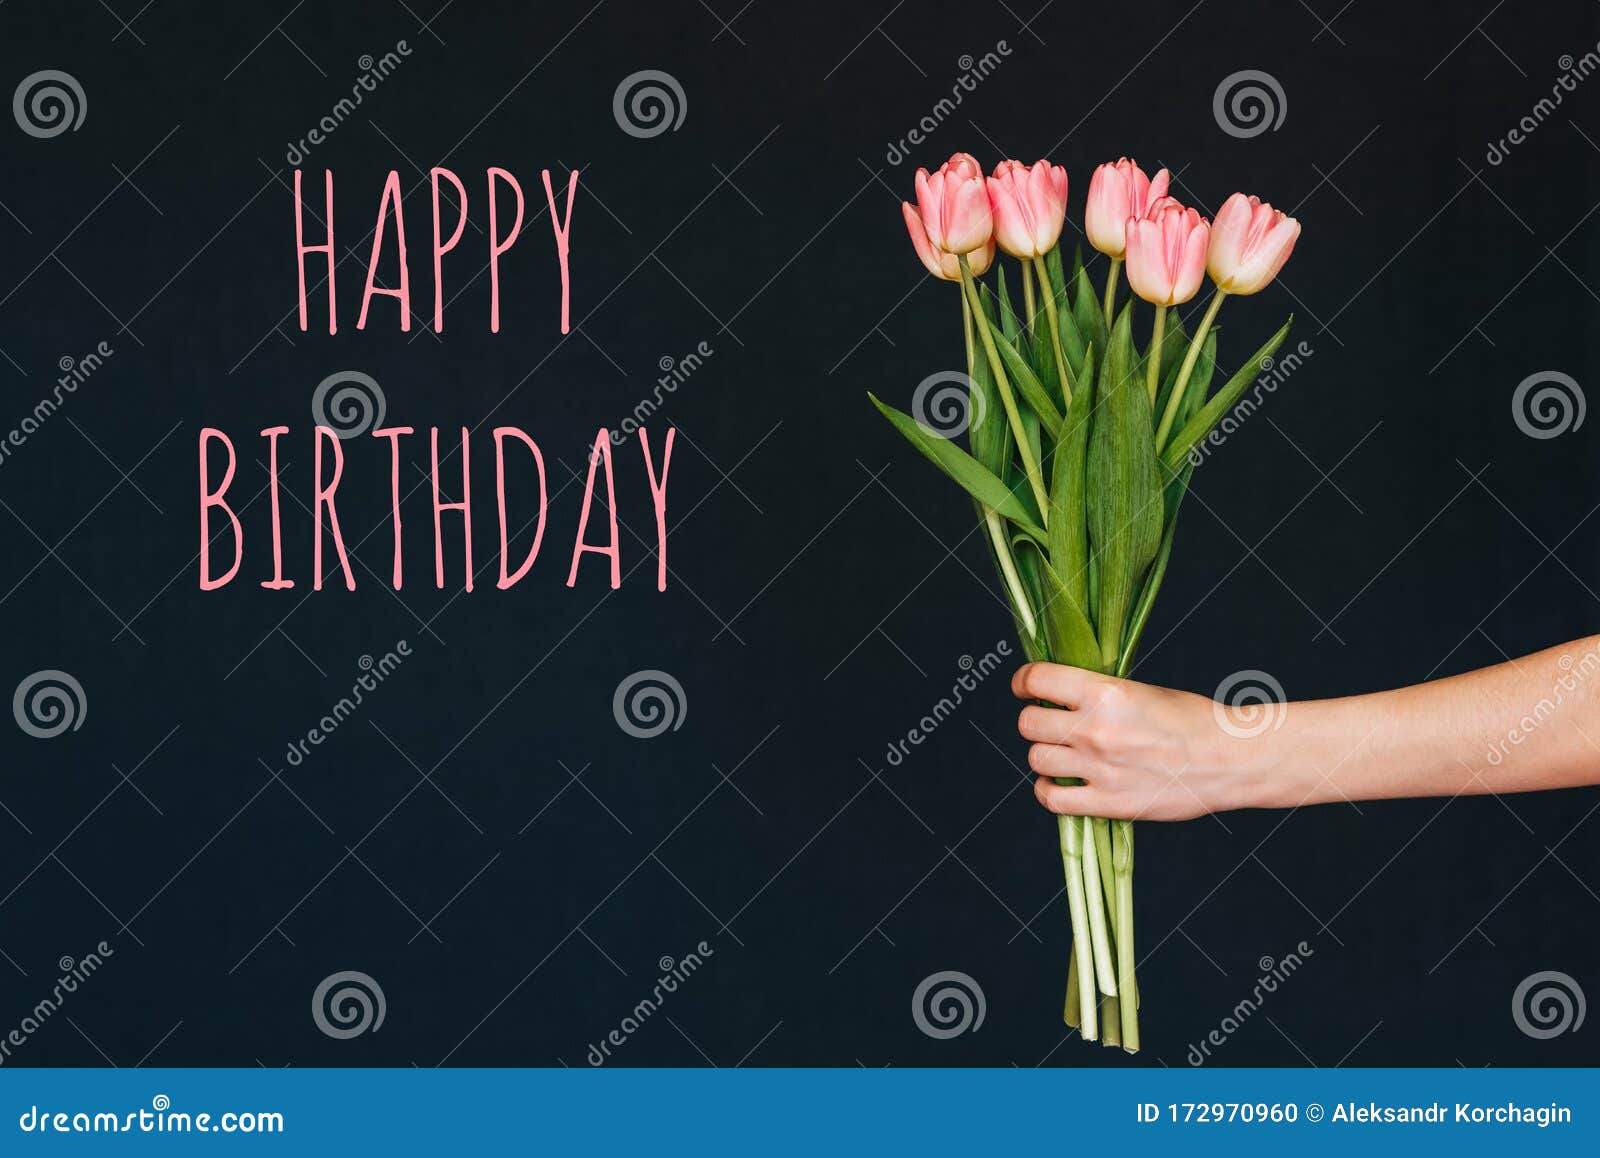 Greeting Card with the Inscription Happy Birthday. Bouquet of Pink ...